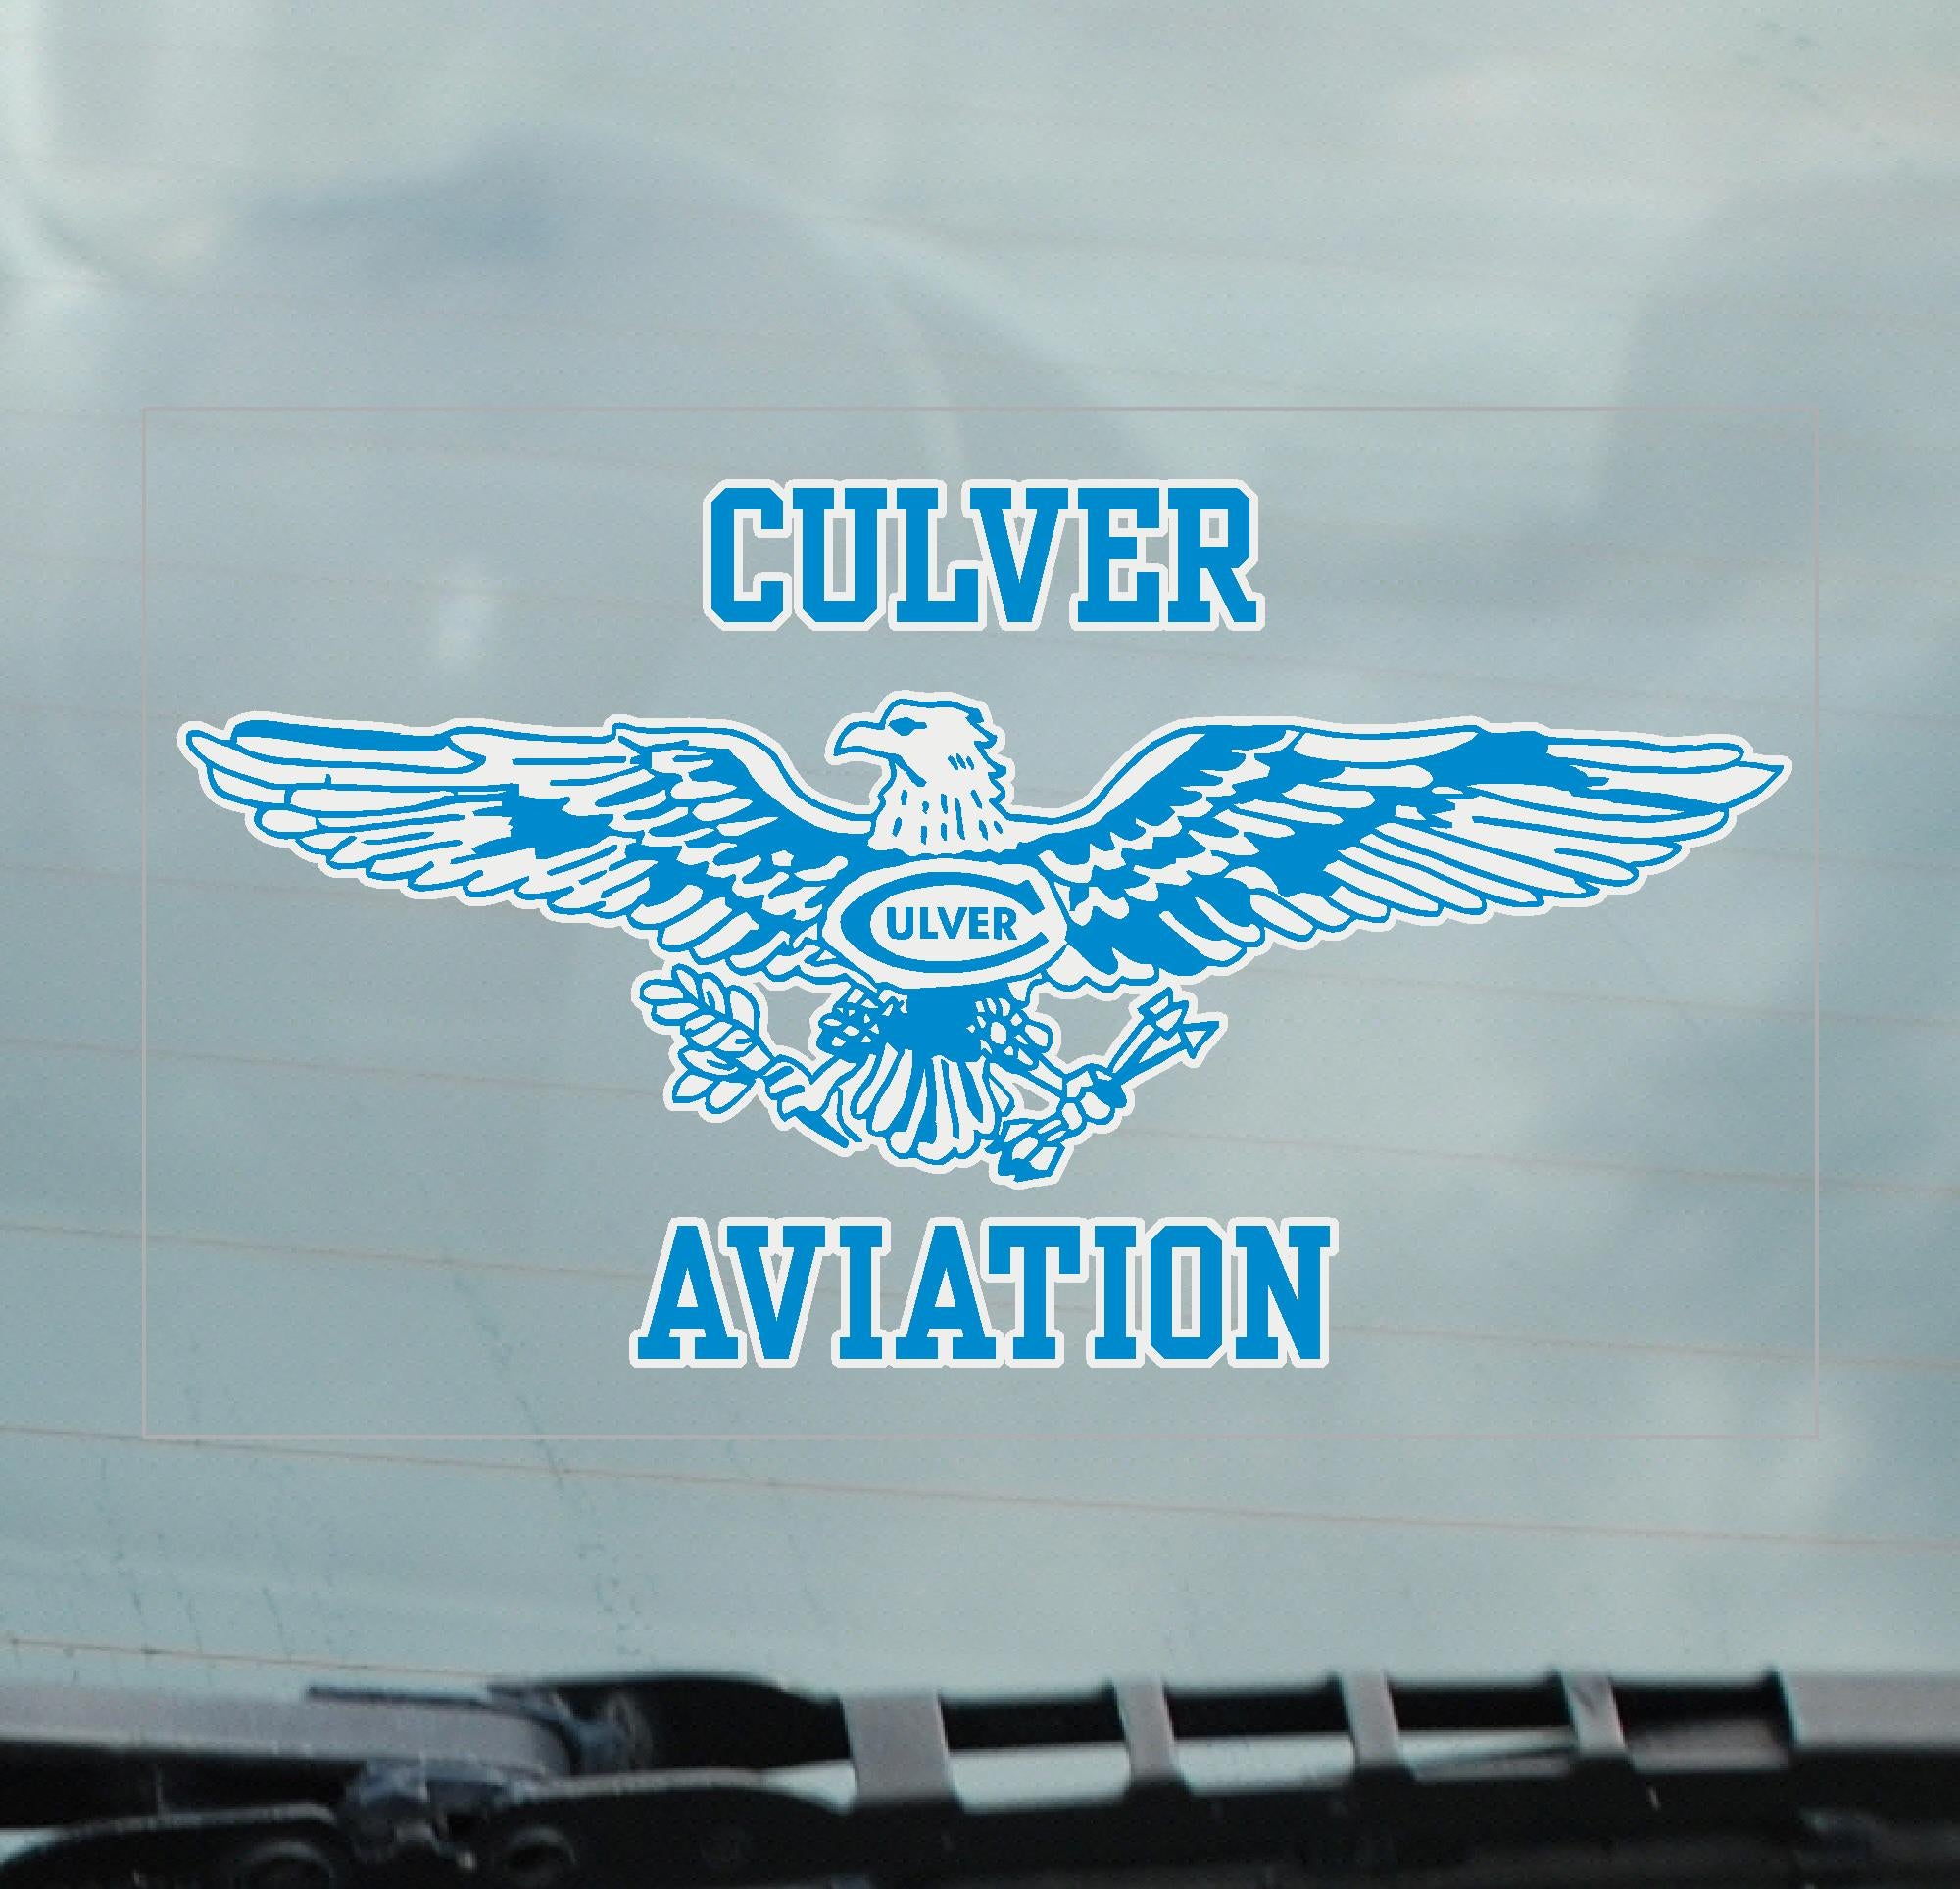 Culver Aviation Static Cling Decal